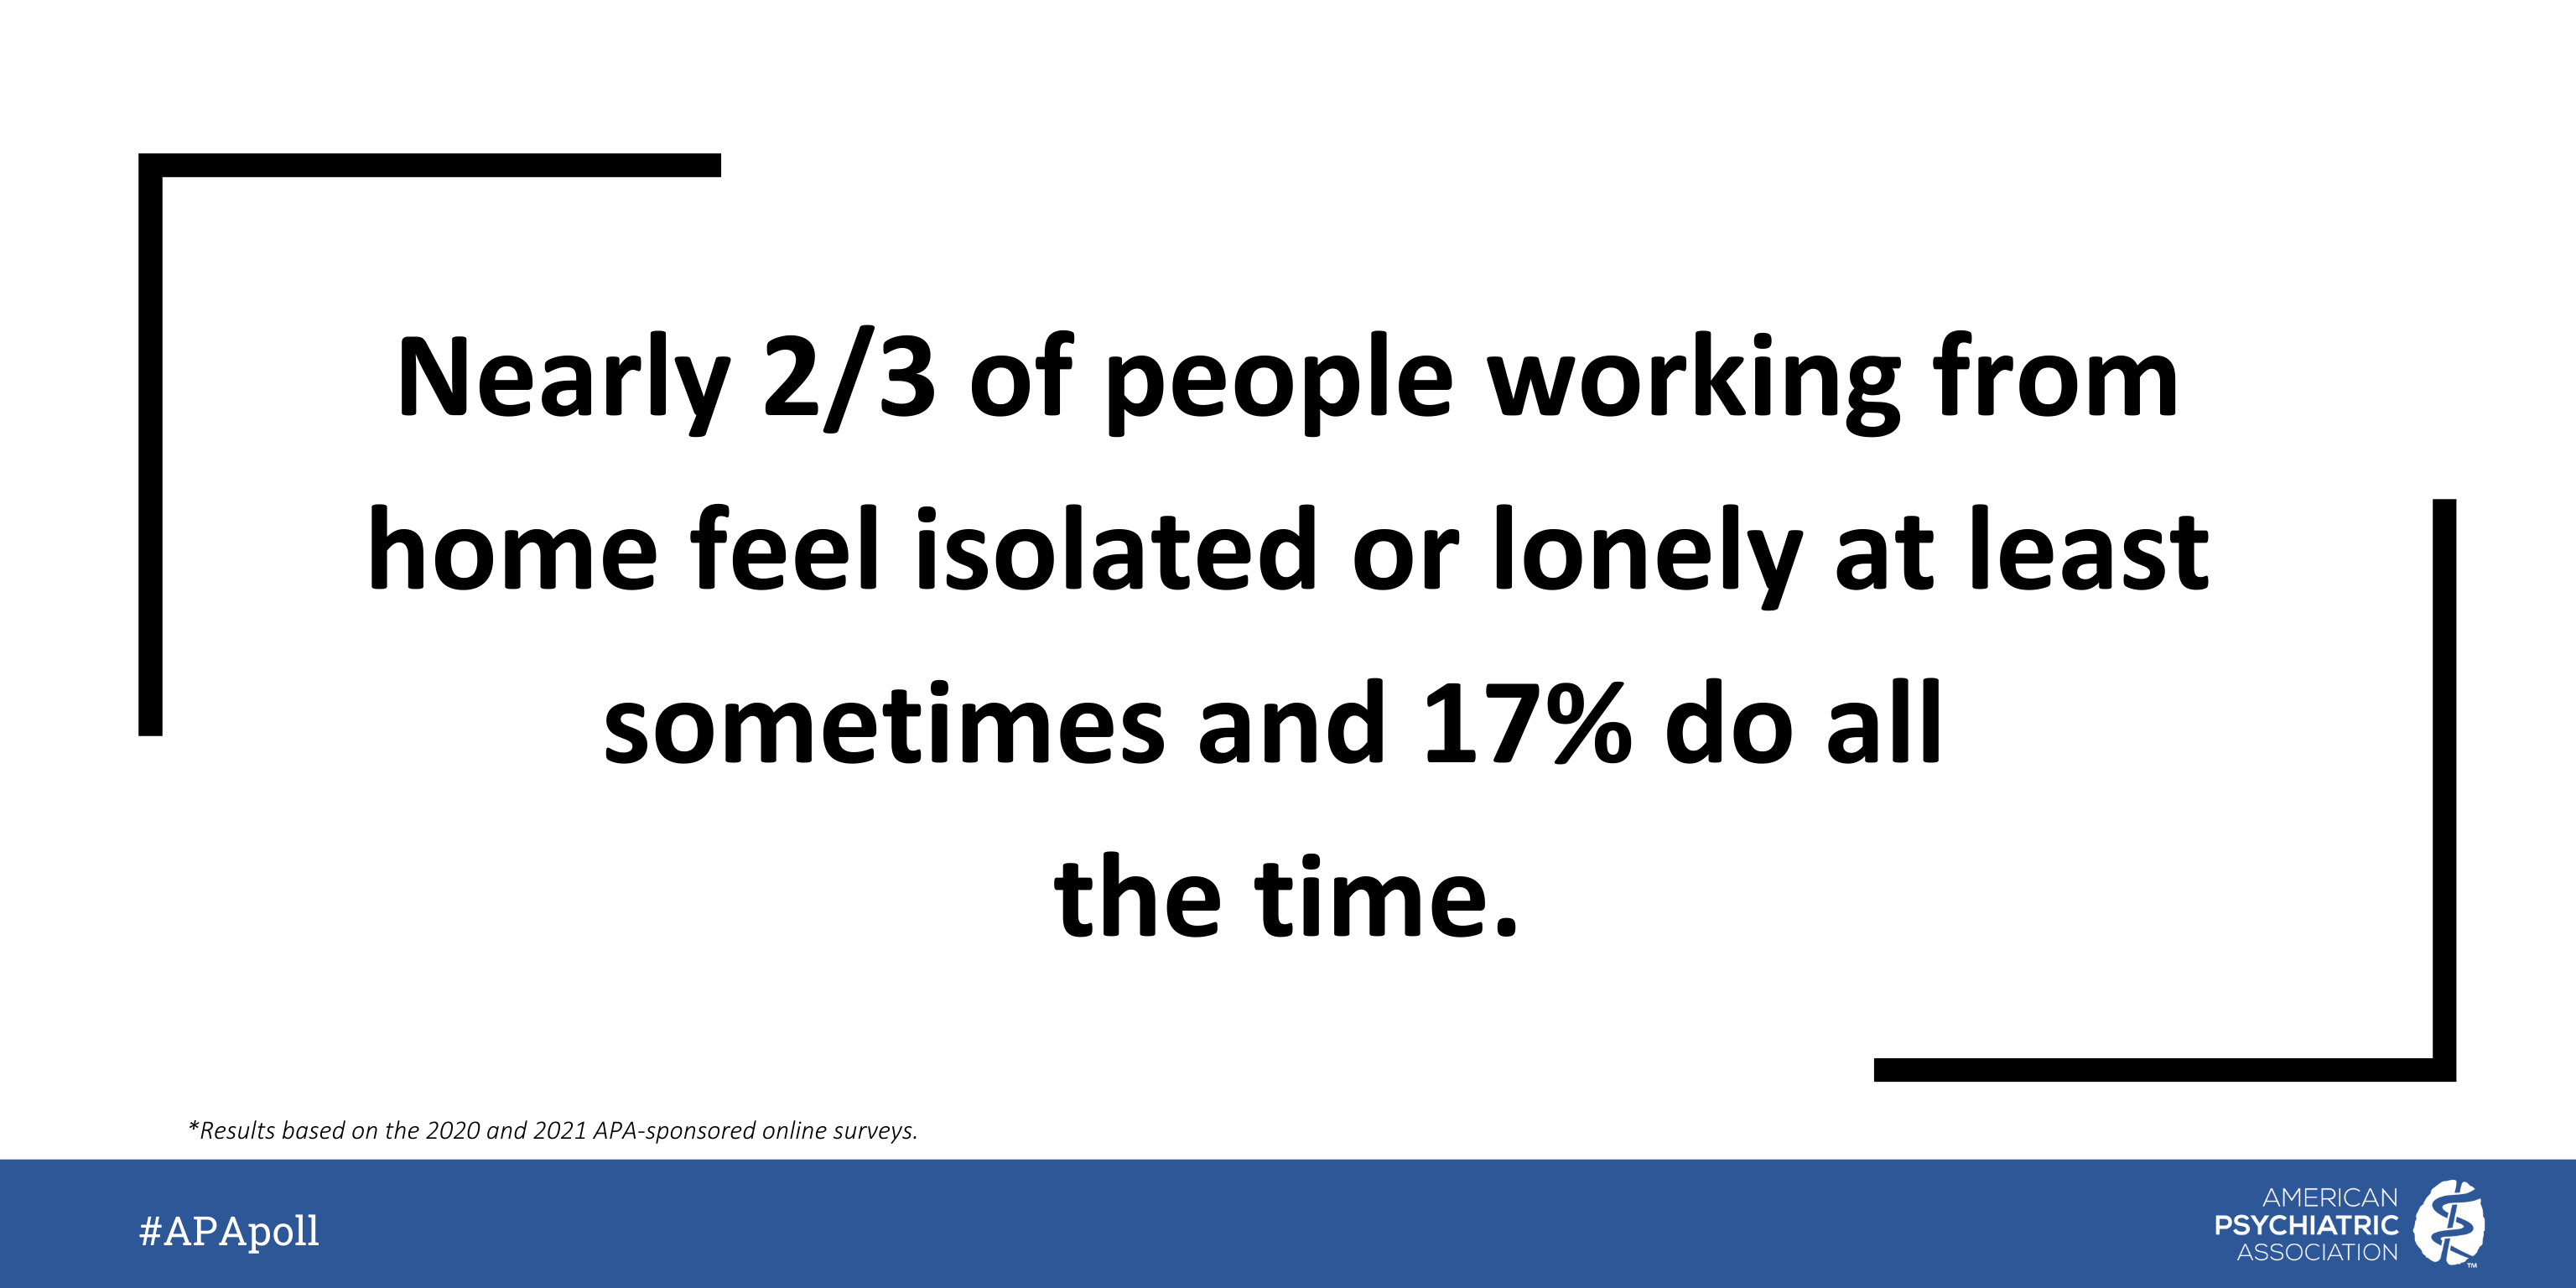 Nearly 2/3 of people working from home feel isolated or lonely at least sometimes and 17% do all the time. #APApoll